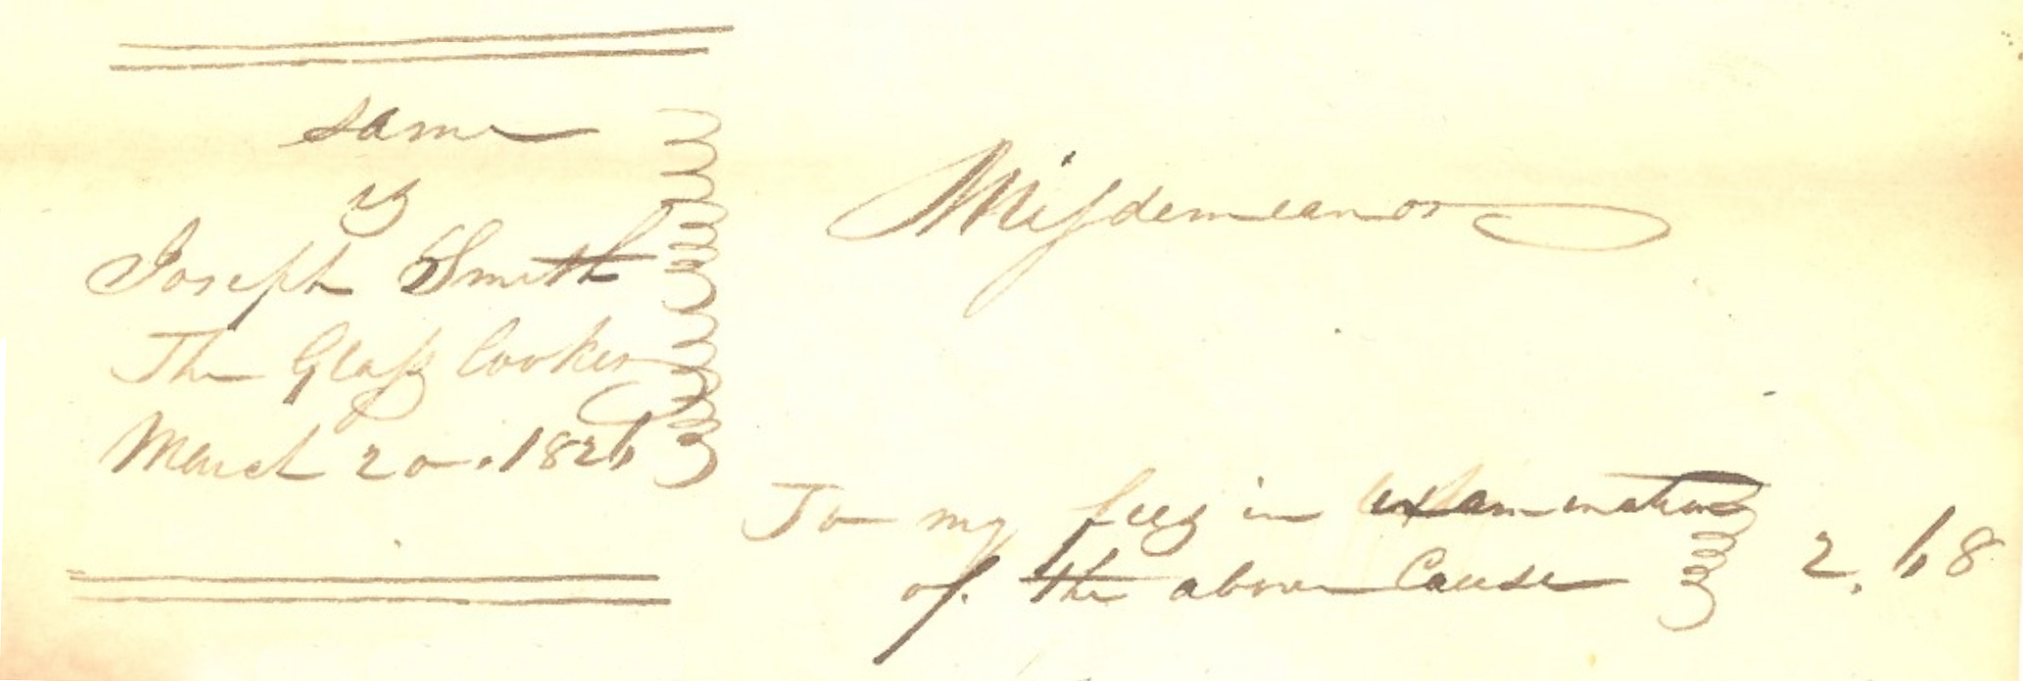 A yellowed document with brown handwriting for an examination fee bill by Judge Albert Neely for a misdemeanor against Joseph Smith The Glass Looker for a total of $2.68.